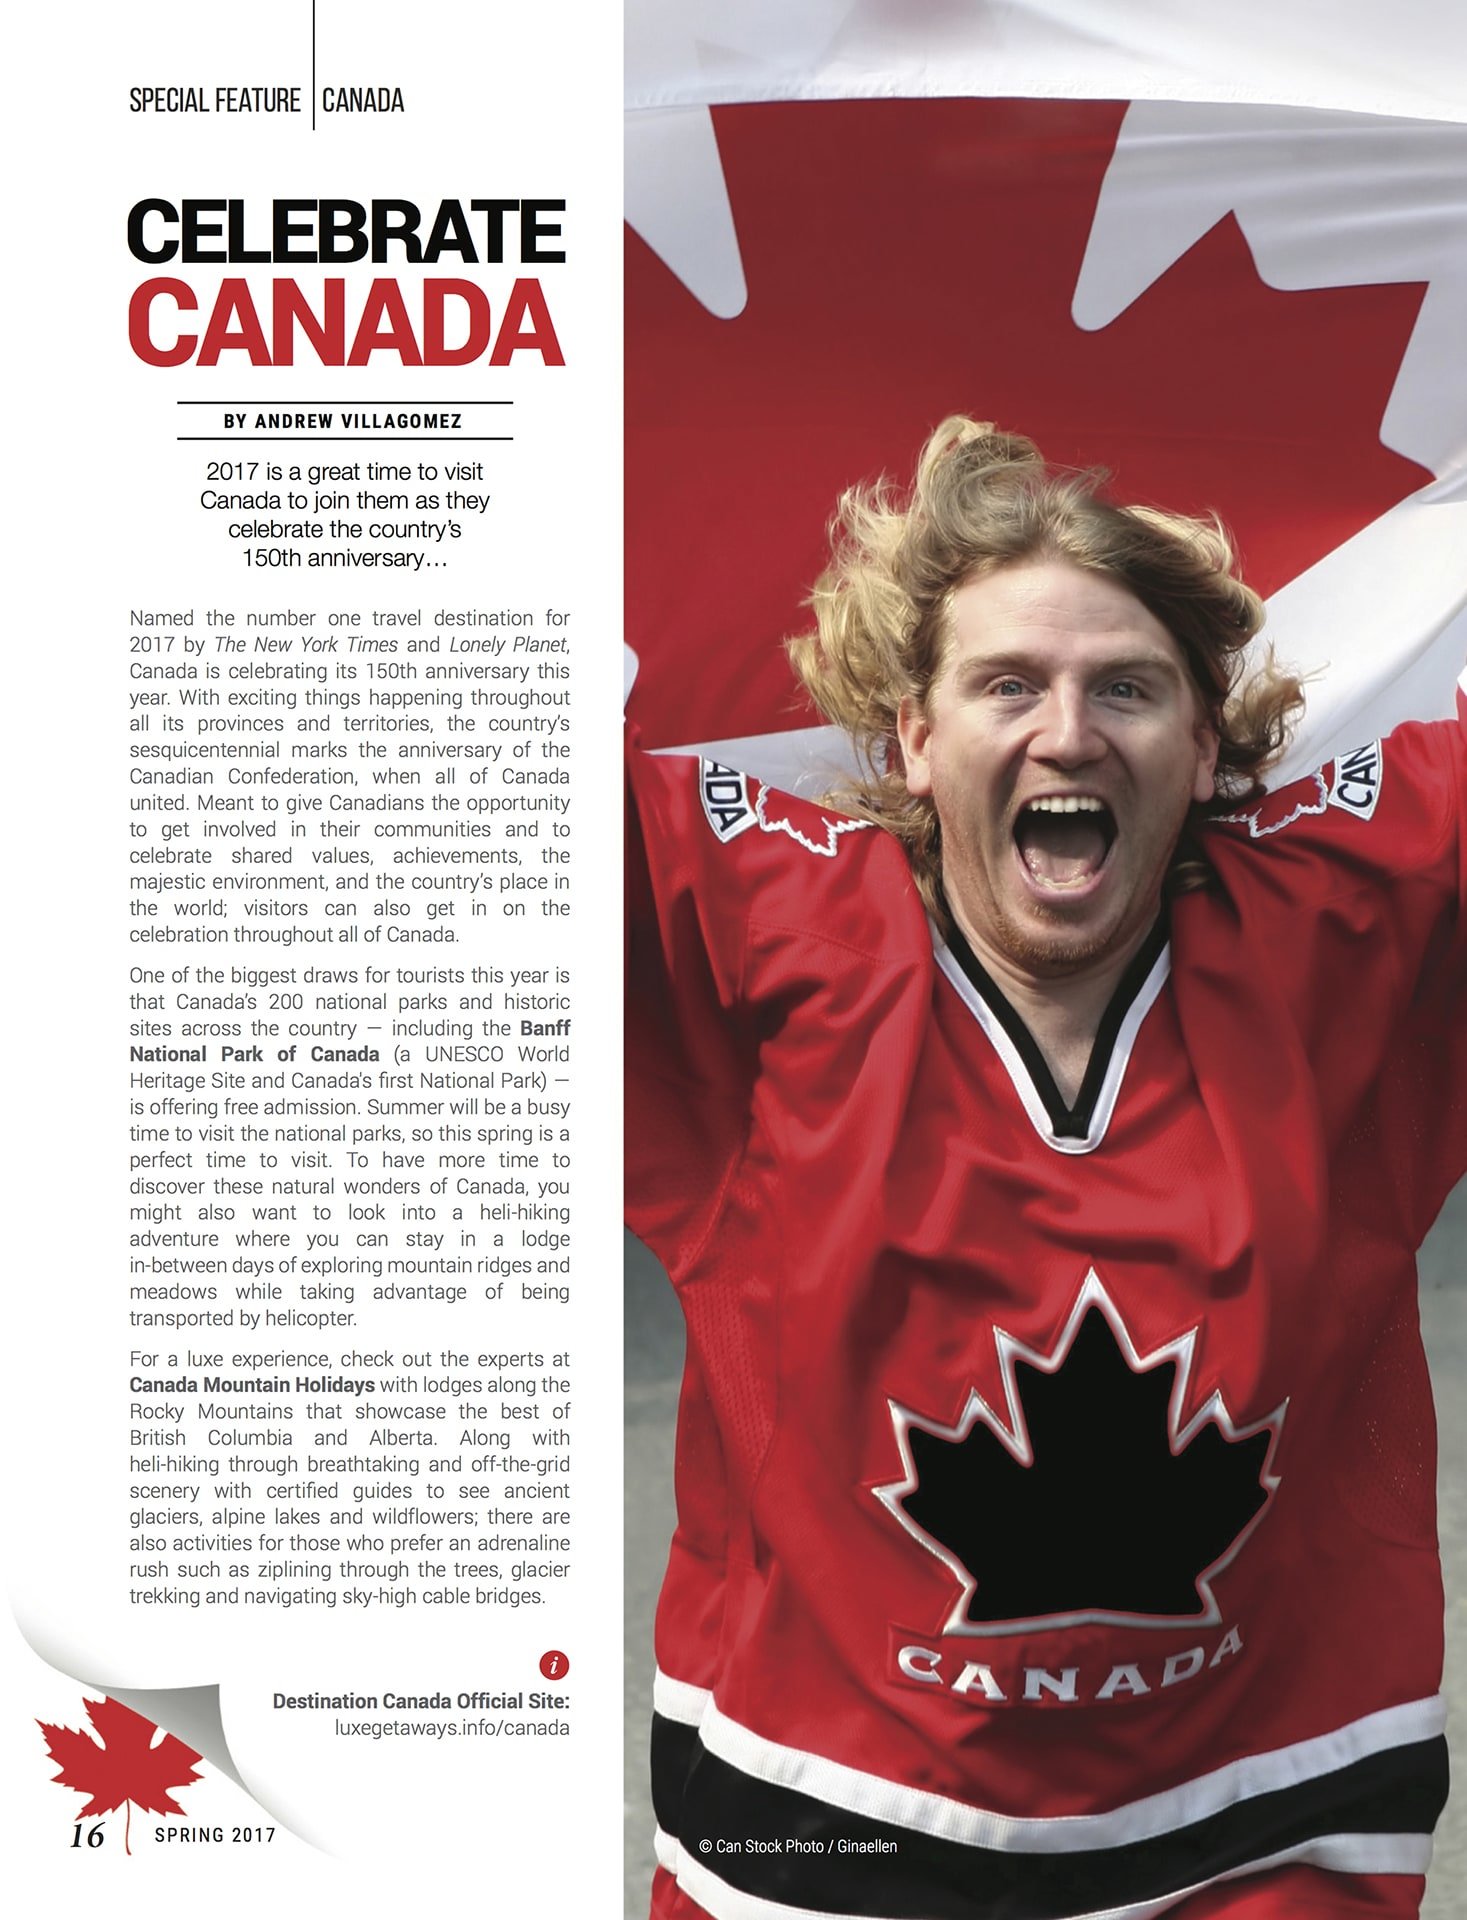 LuxeGetaways - Luxury Travel - Luxury Travel Magazine - Celebrate Canada - Canada Anniversary - Canada Travel Guide - Toronto Guide, Vancouver Guide, Montreal Guide - Canada Celebration